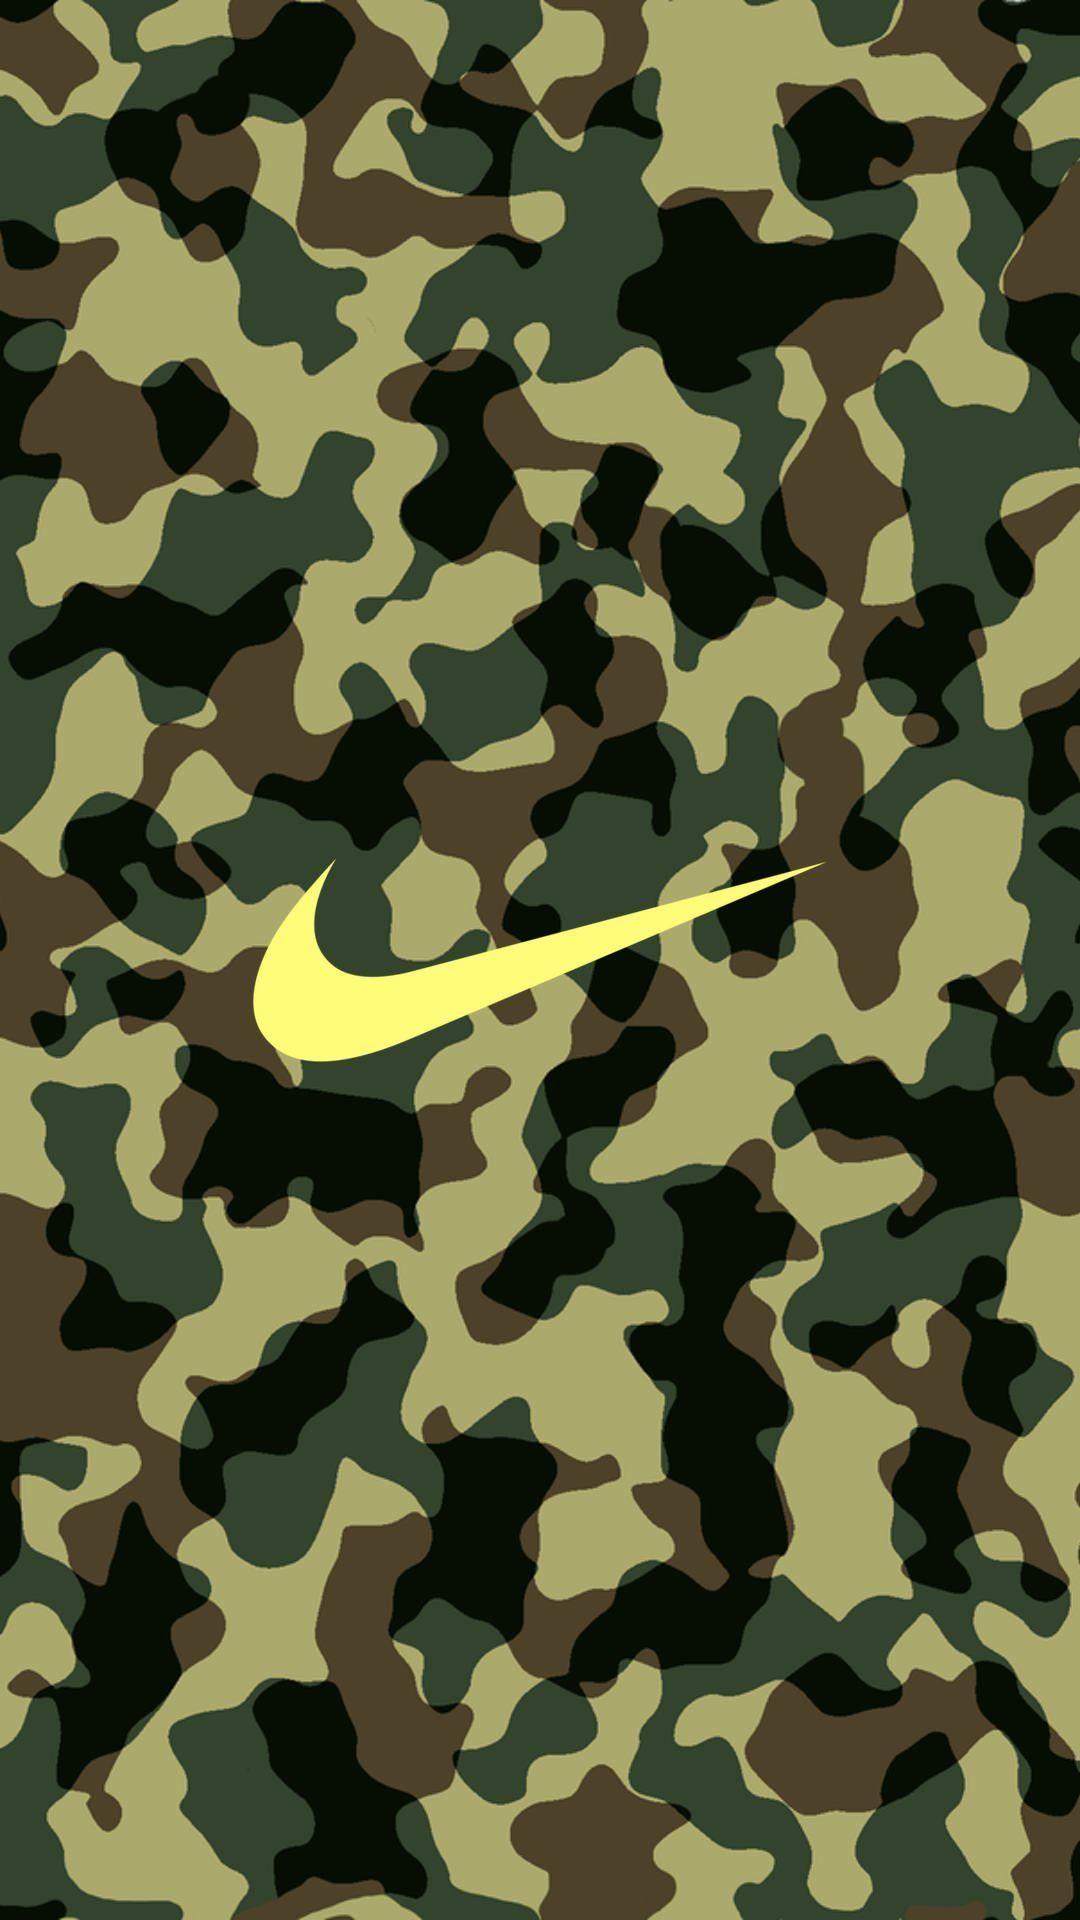 Camouflage Nike Logo - NIKE Logo Camouflage iPhone Wallpaper | Sayings and Wallpapers ...